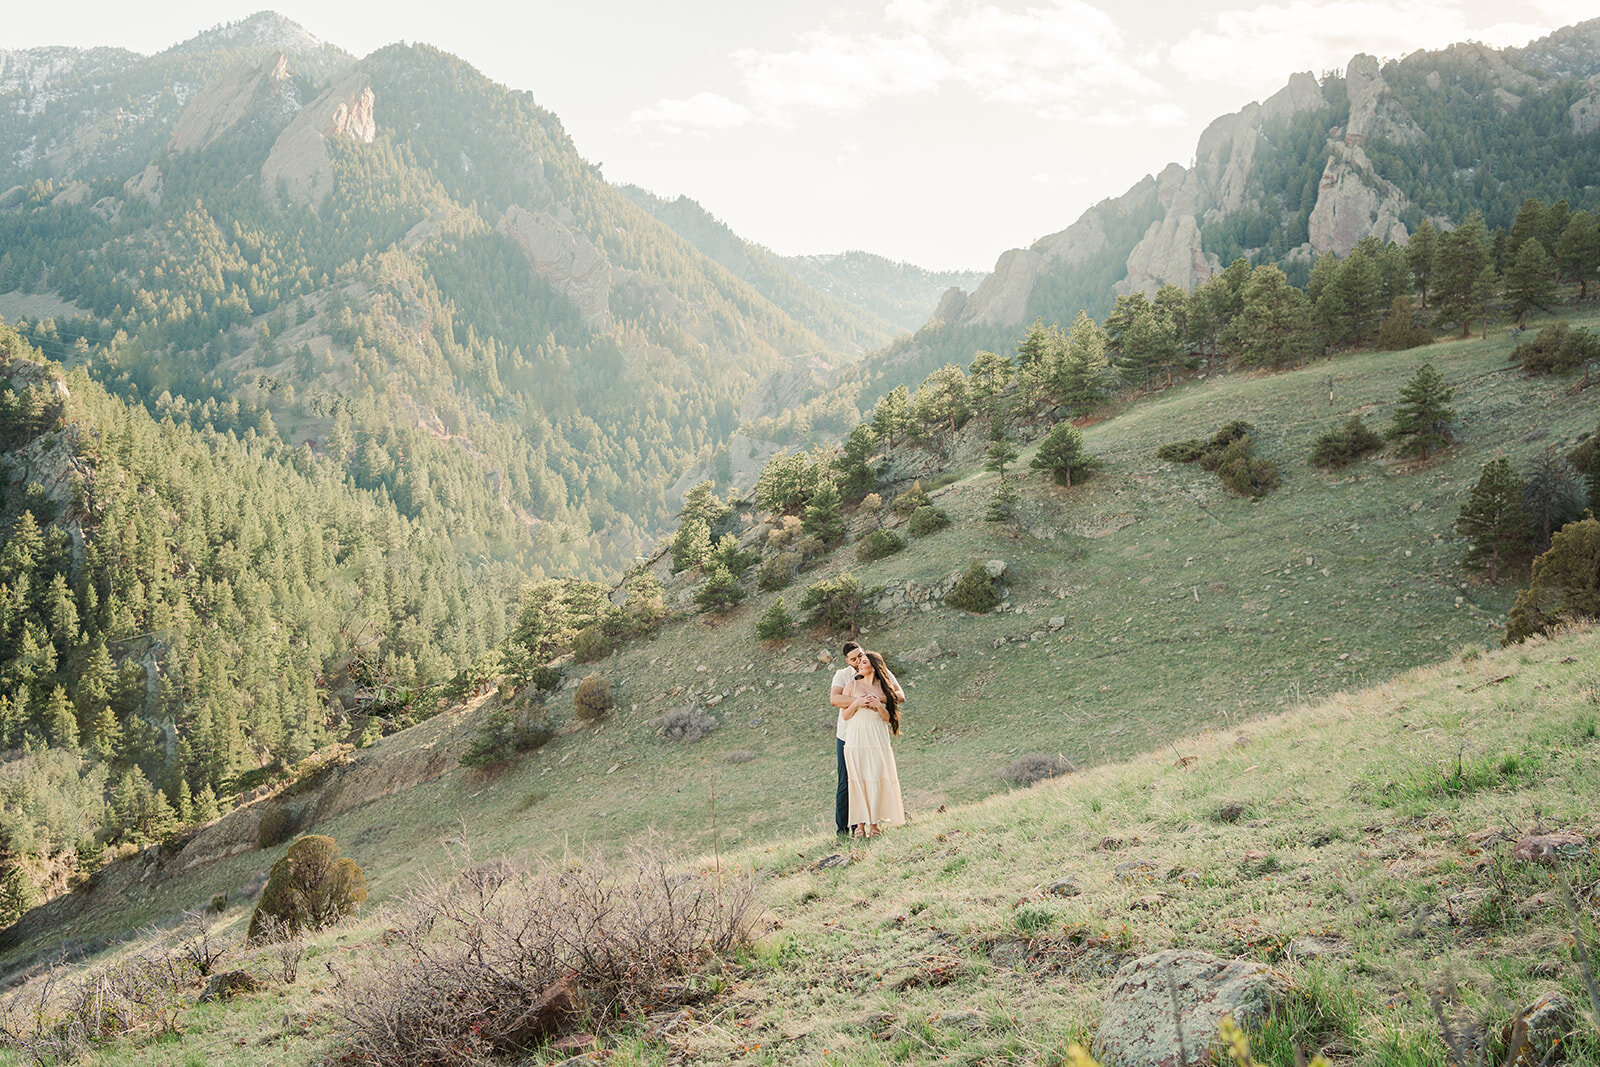 Whether you're celebrating an anniversary, engagement, or just because, a romantic couple's session in the Colorado mountains is the perfect way to capture your love. Sam Immer Photography will create a personalized and meaningful experience just for you.